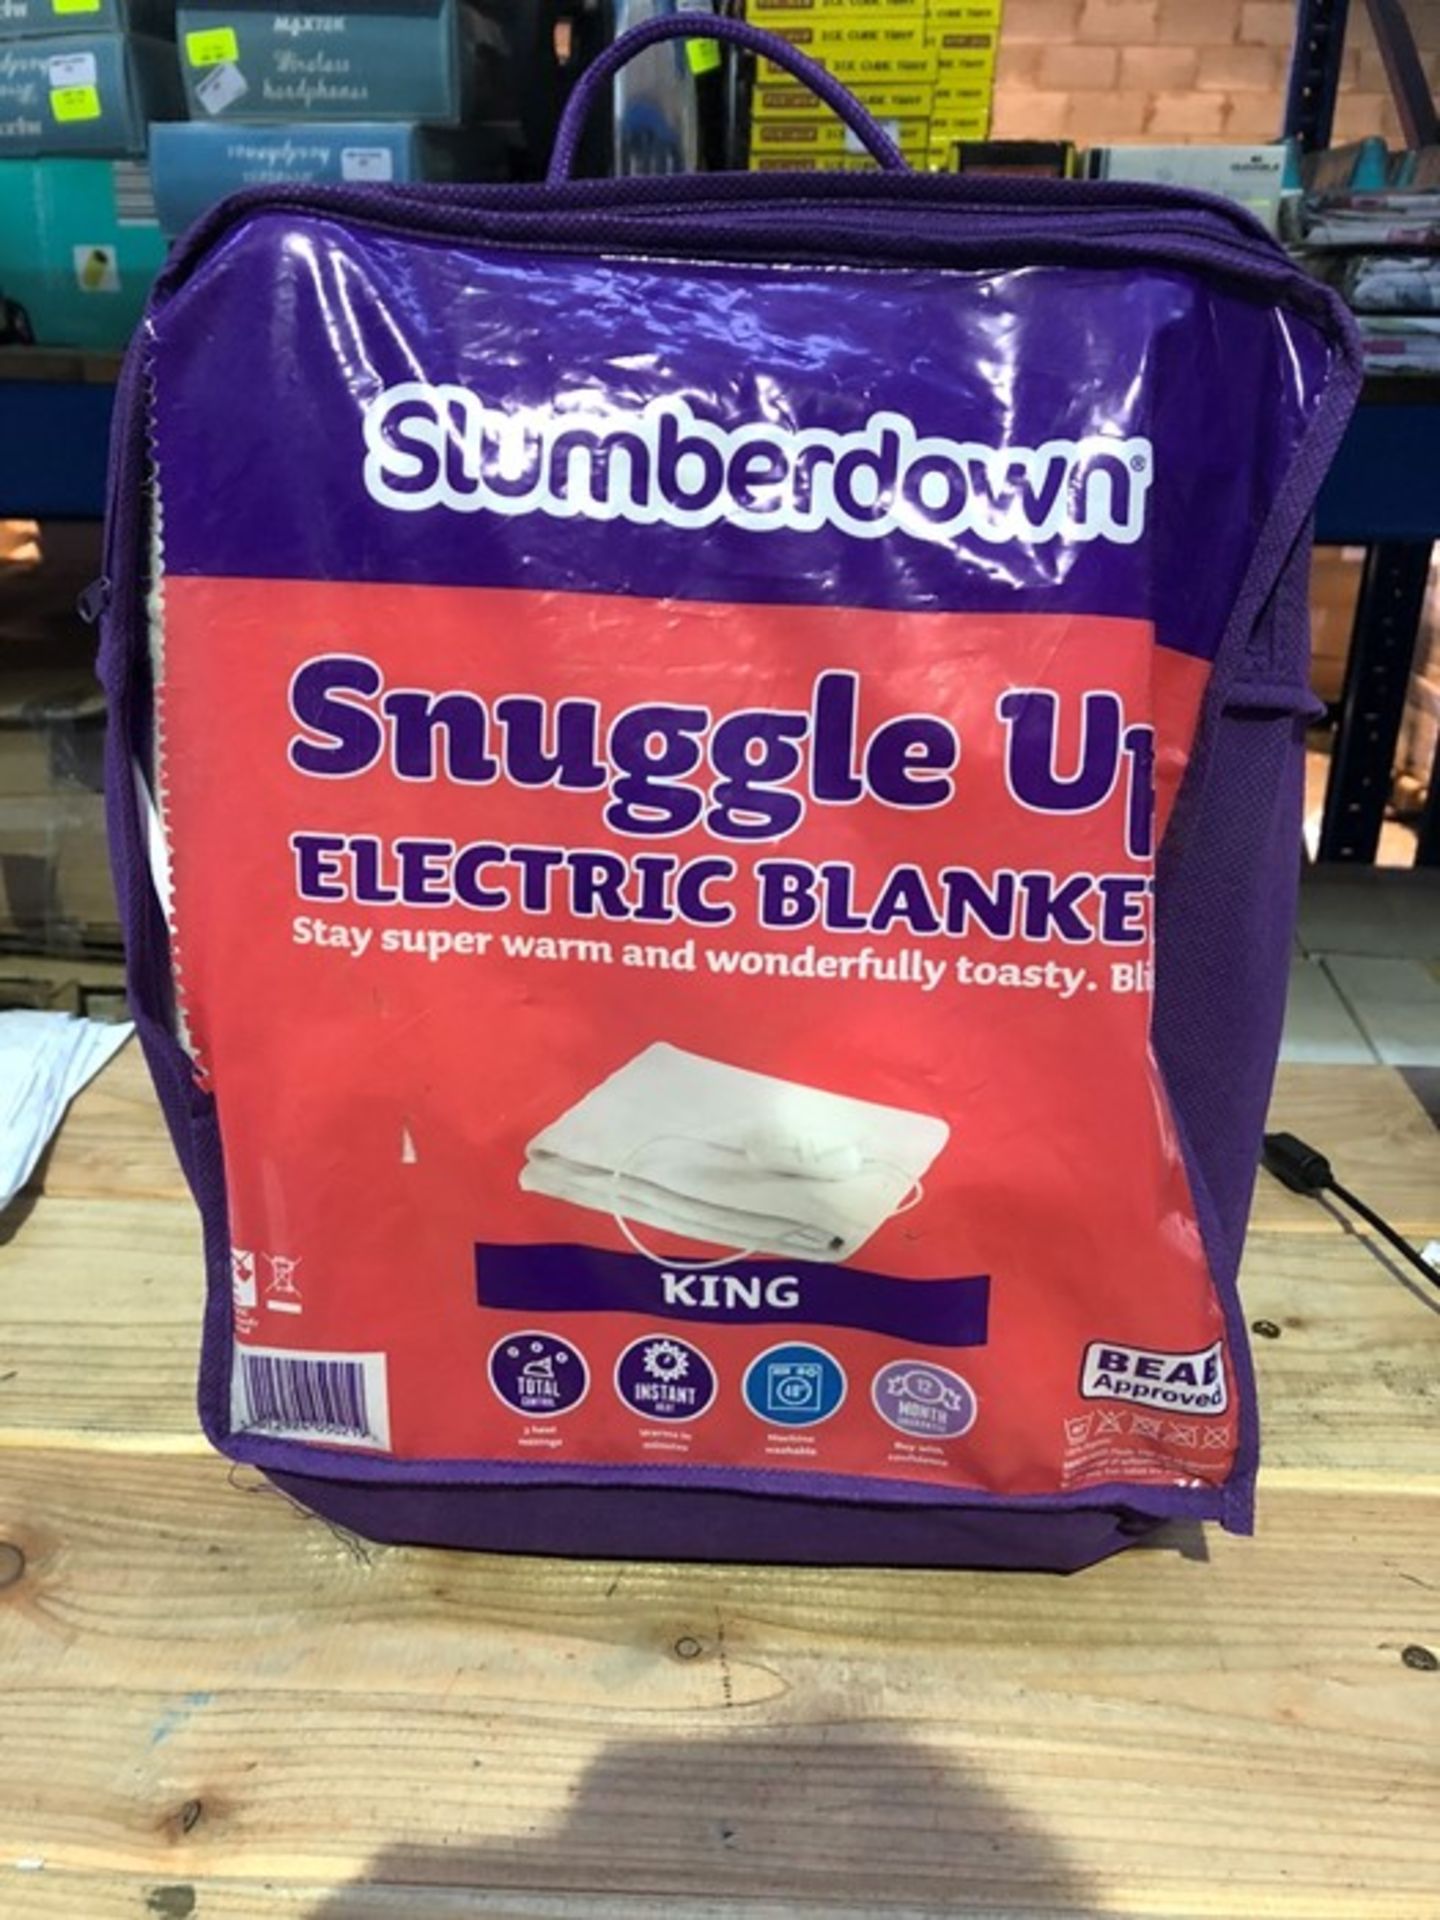 1 BAGGED SLUMBERDOWN SNUGGLE UP ELECTRIC BLANKET KING SIZED (PUBLIC VIEWING AVAILABLE)